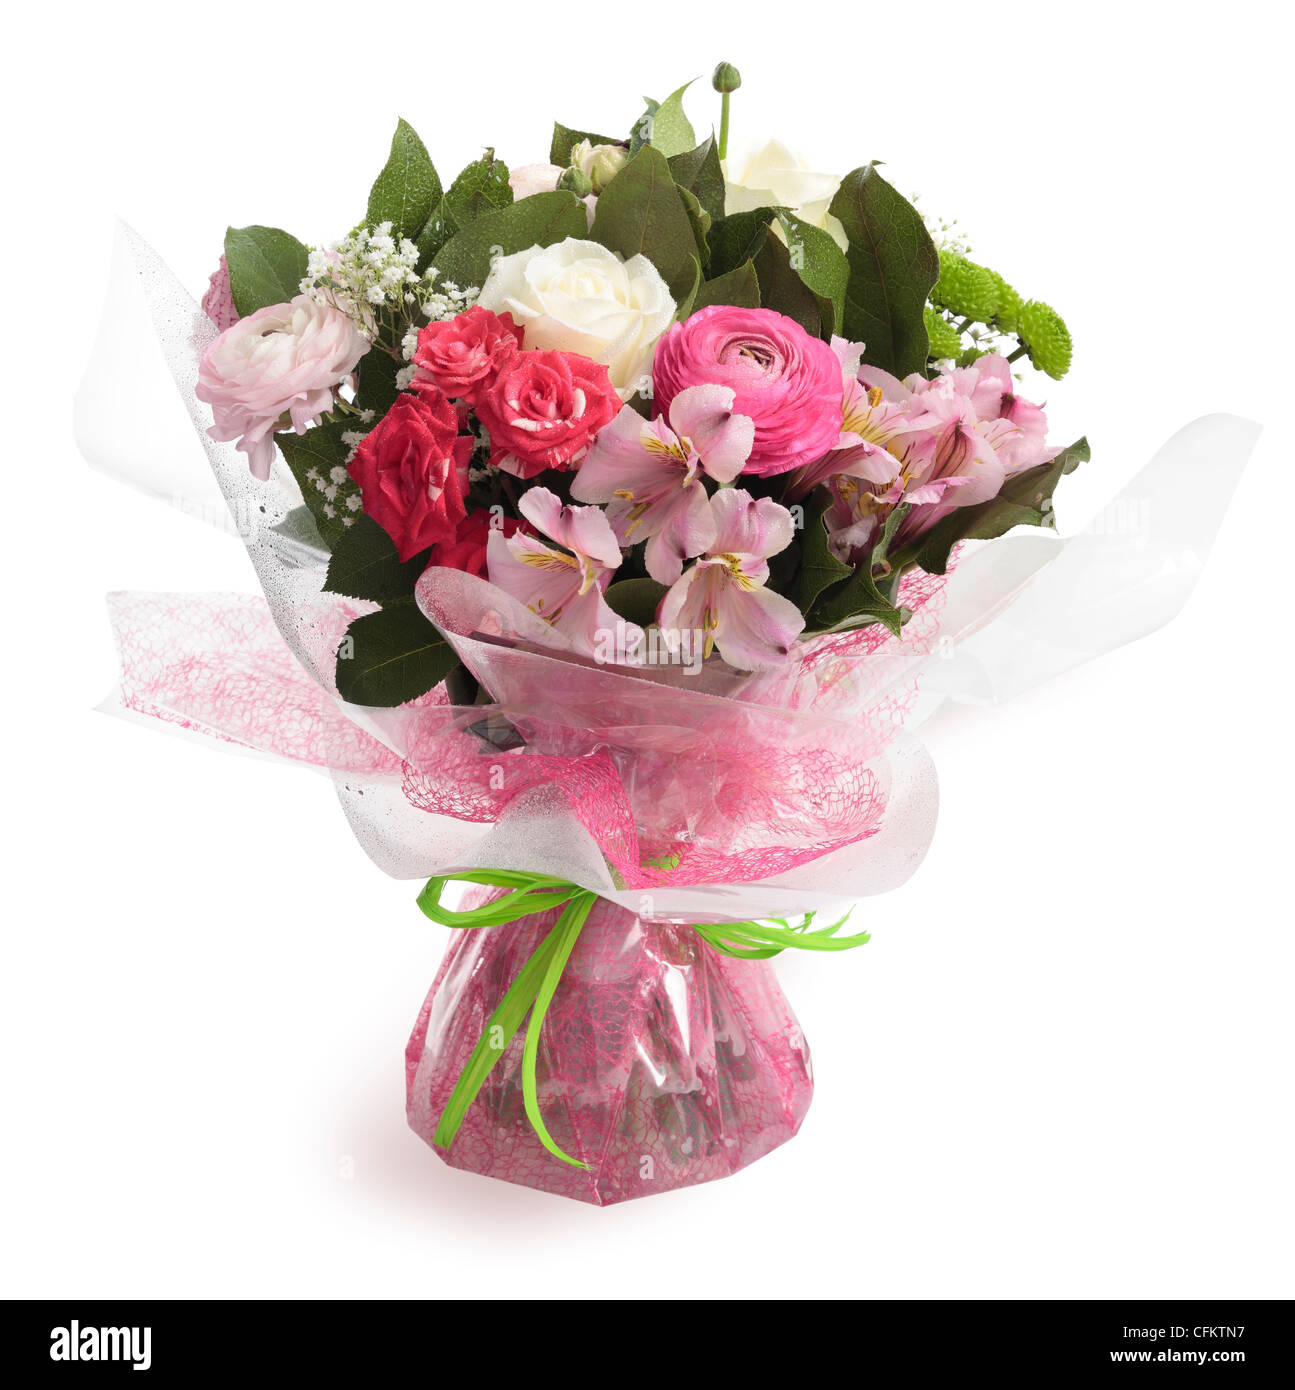 Bouquet of Flowers including roses, ranunculus, alstroemeria, Peruvian lily and green chrysanthemum. Stock Photo